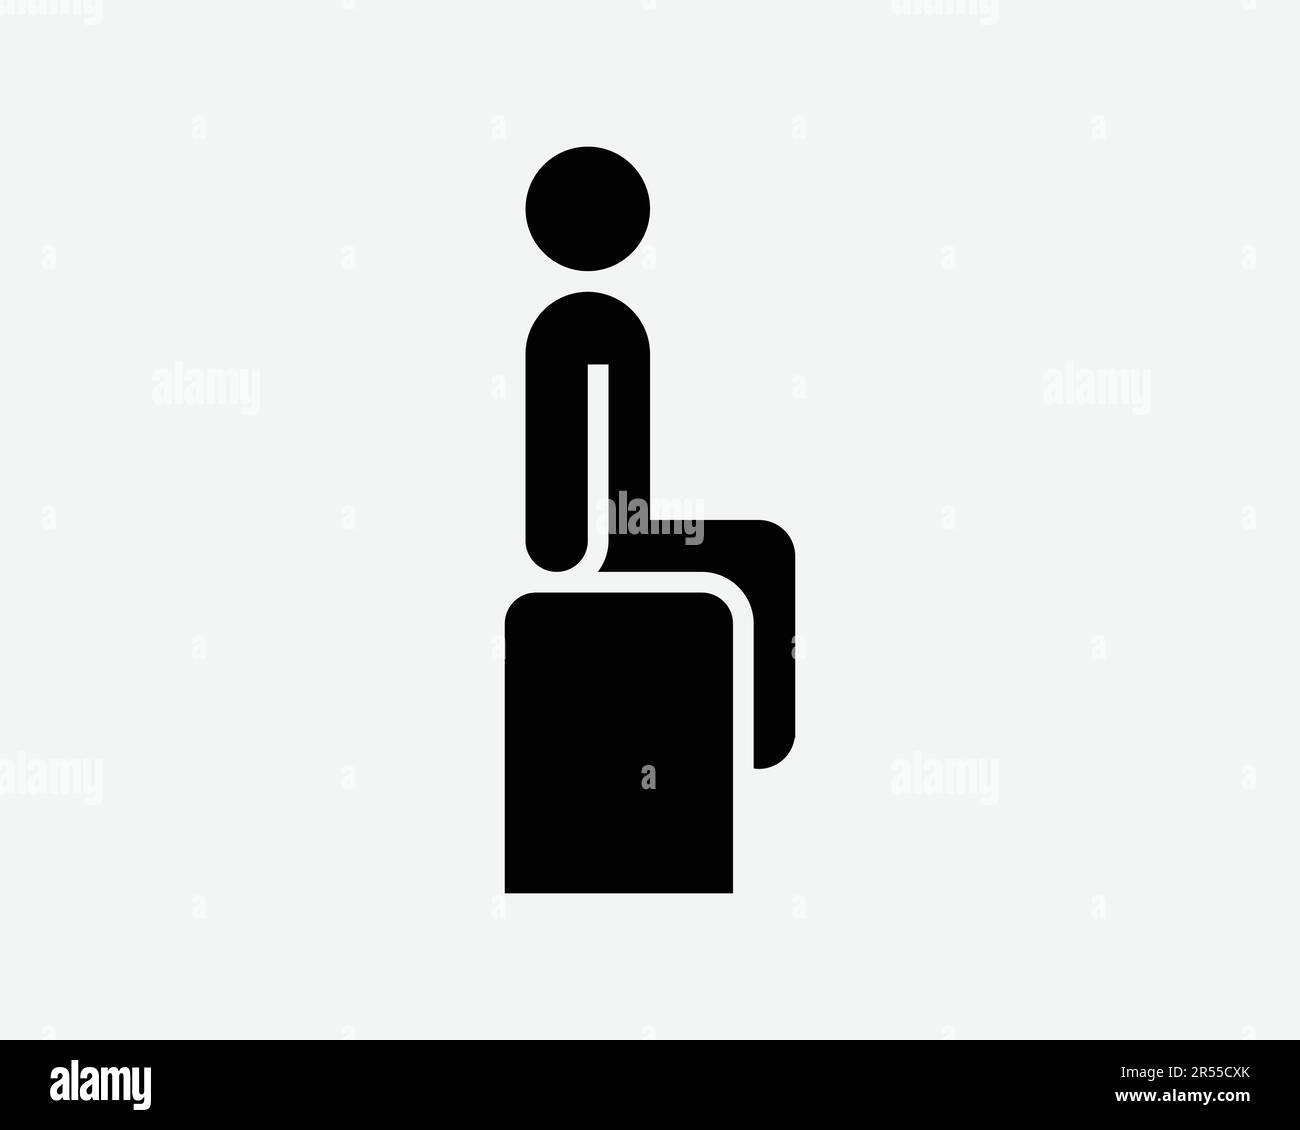 Man Sitting Icon. Person Sit Bench Chair Wait Waiting Seat Patience Male Boy Human Sign Symbol Black Artwork Graphic Illustration Clipart EPS Vector Stock Vector